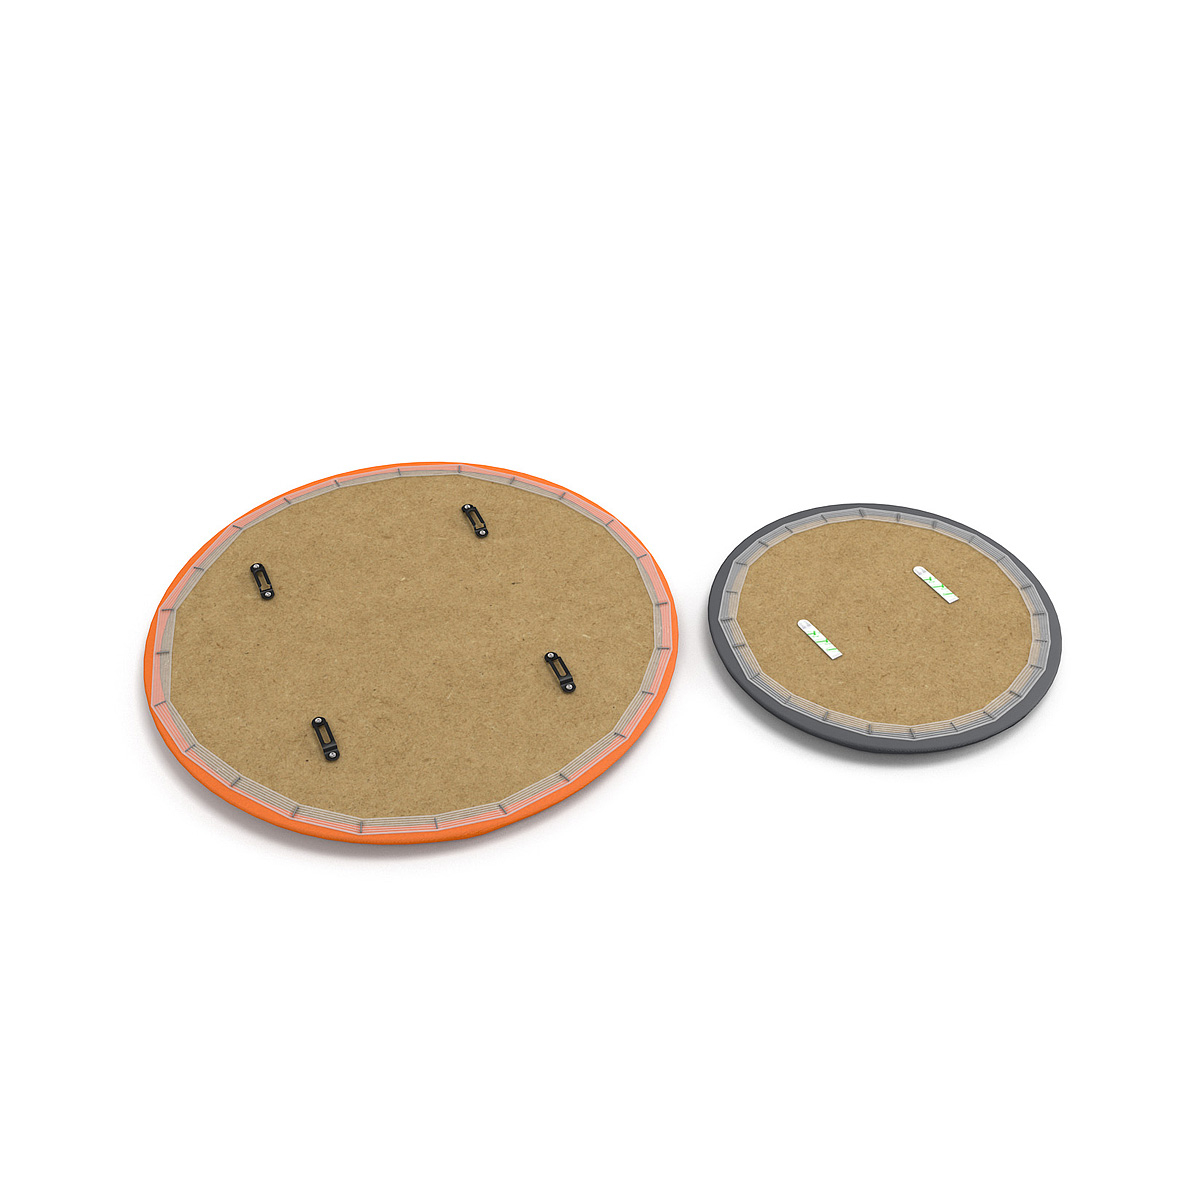 CARRERA™ Circular Acoustic Wall Panels Offer Two Fixing Options - Keyhole Bracket And Velcro